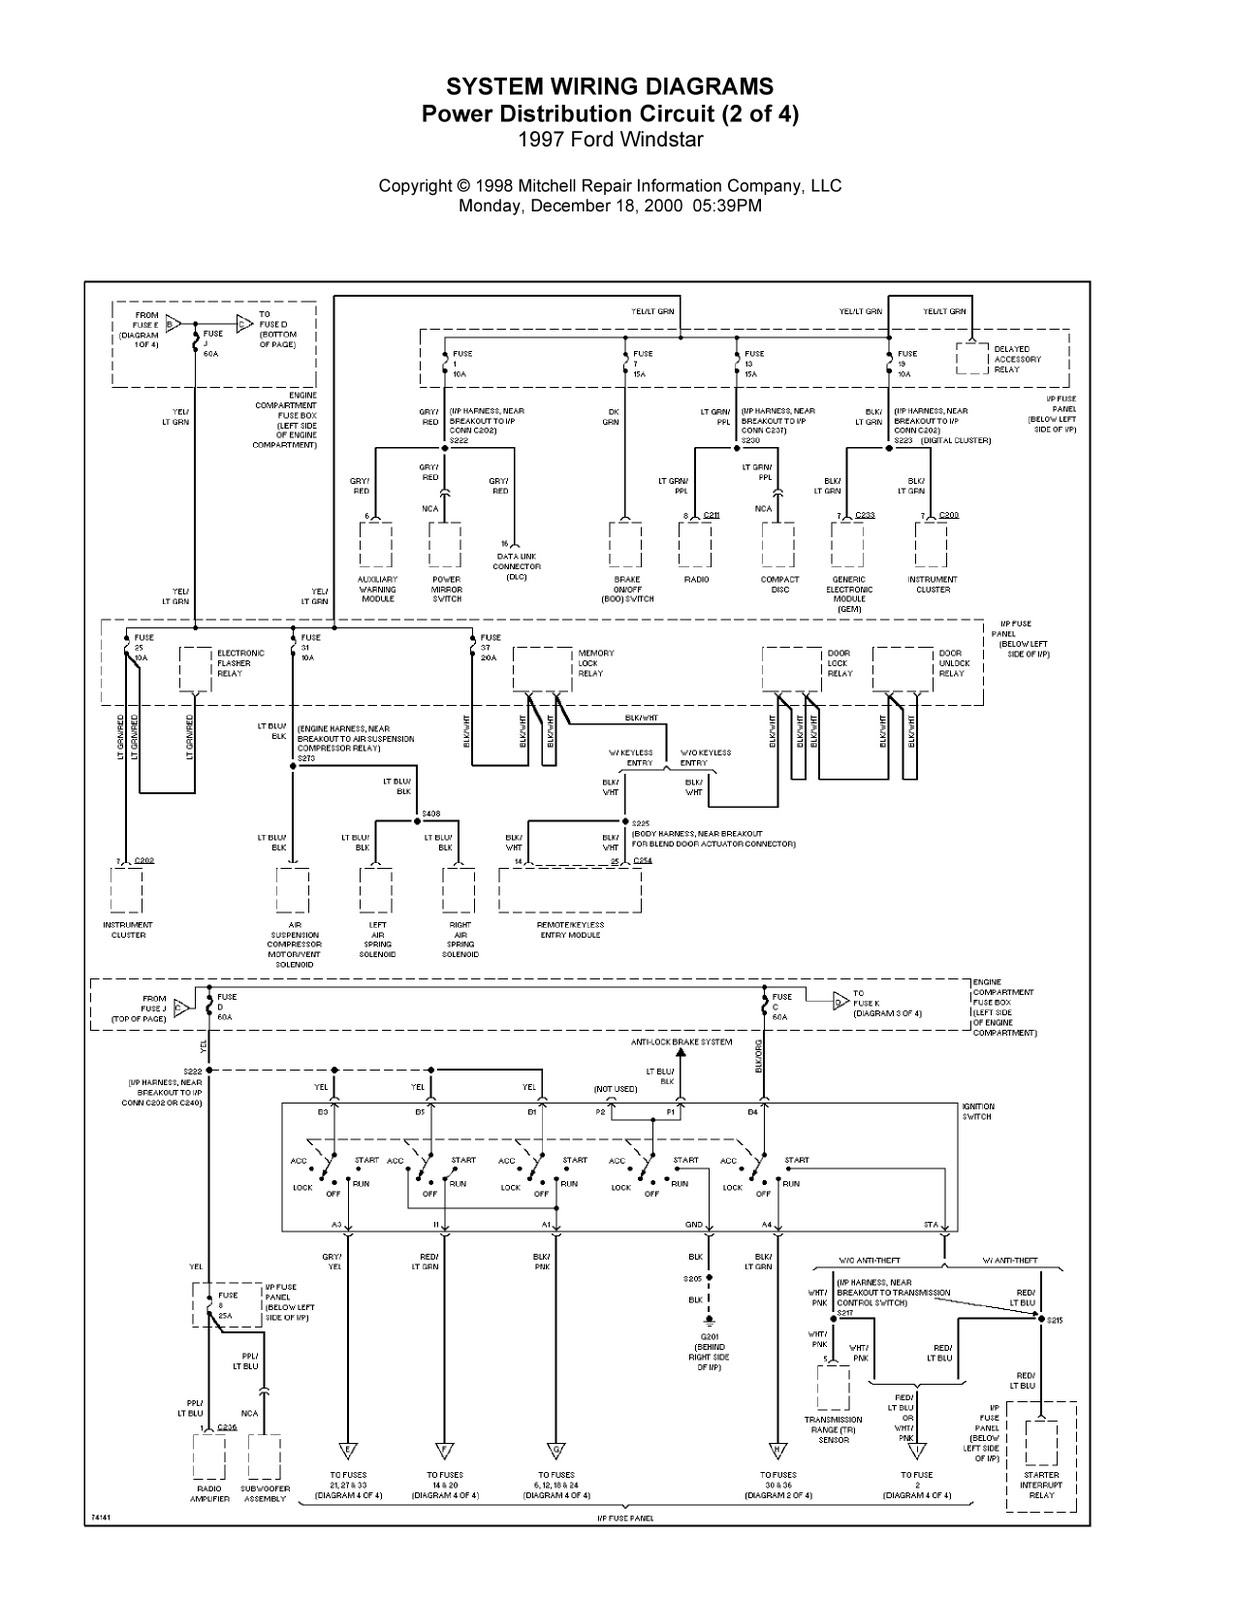 1996 Ford Windstar Firing Order | Wiring and Printable